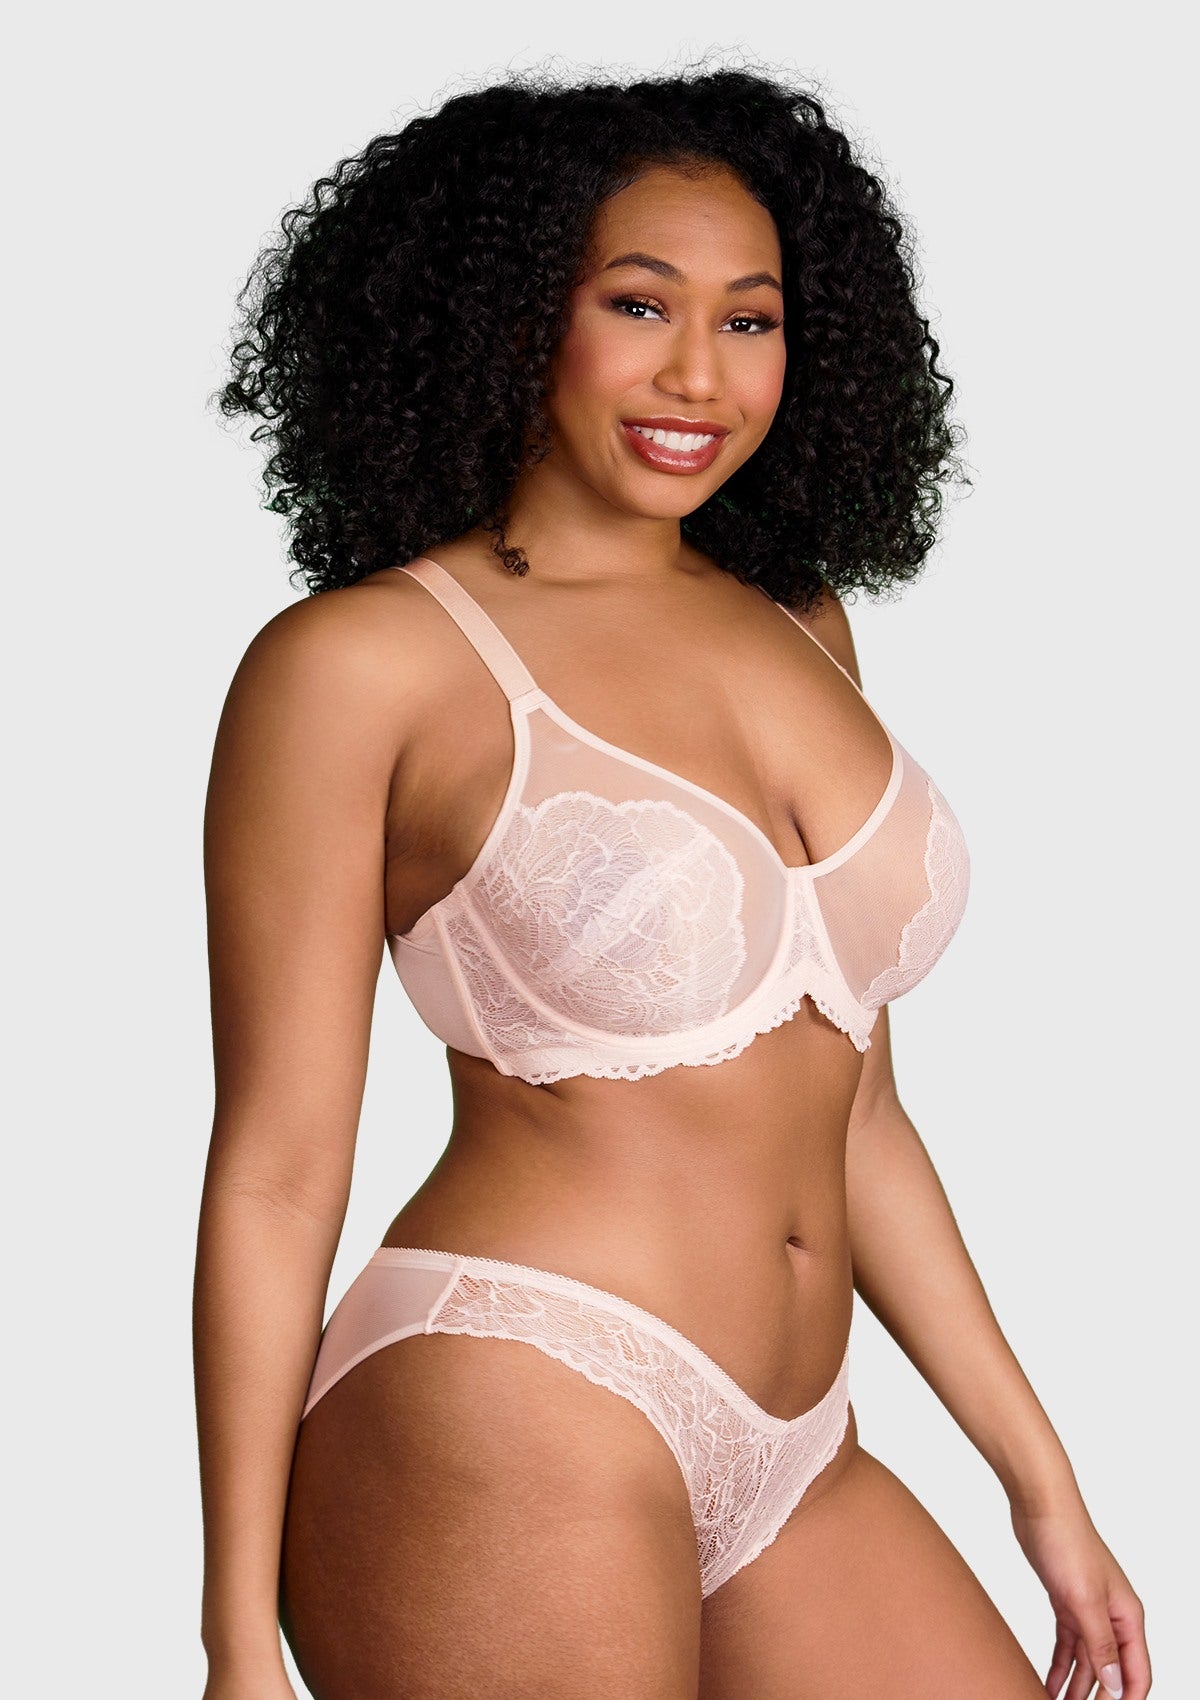 HSIA Blossom Sheer Lace Bra: Comfortable Underwire Bra For Big Busts - Dusty Peach / 38 / C